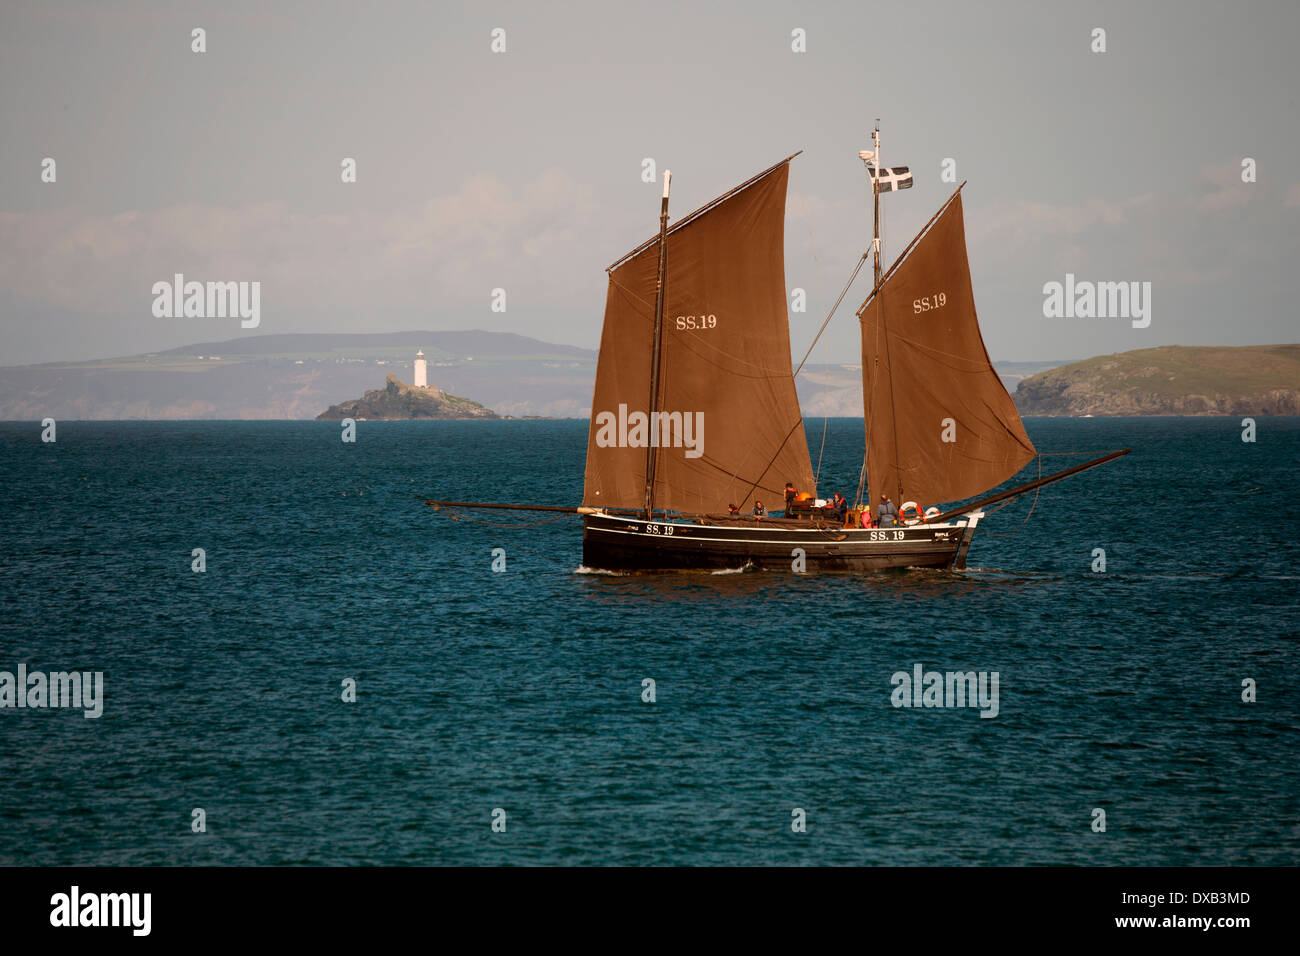 The ancient sailing lugger (a traditional fishing boat), the 'Ripple' in St Ives Bay, with Godrevy lighthouse, Cornwall, UK. Stock Photo